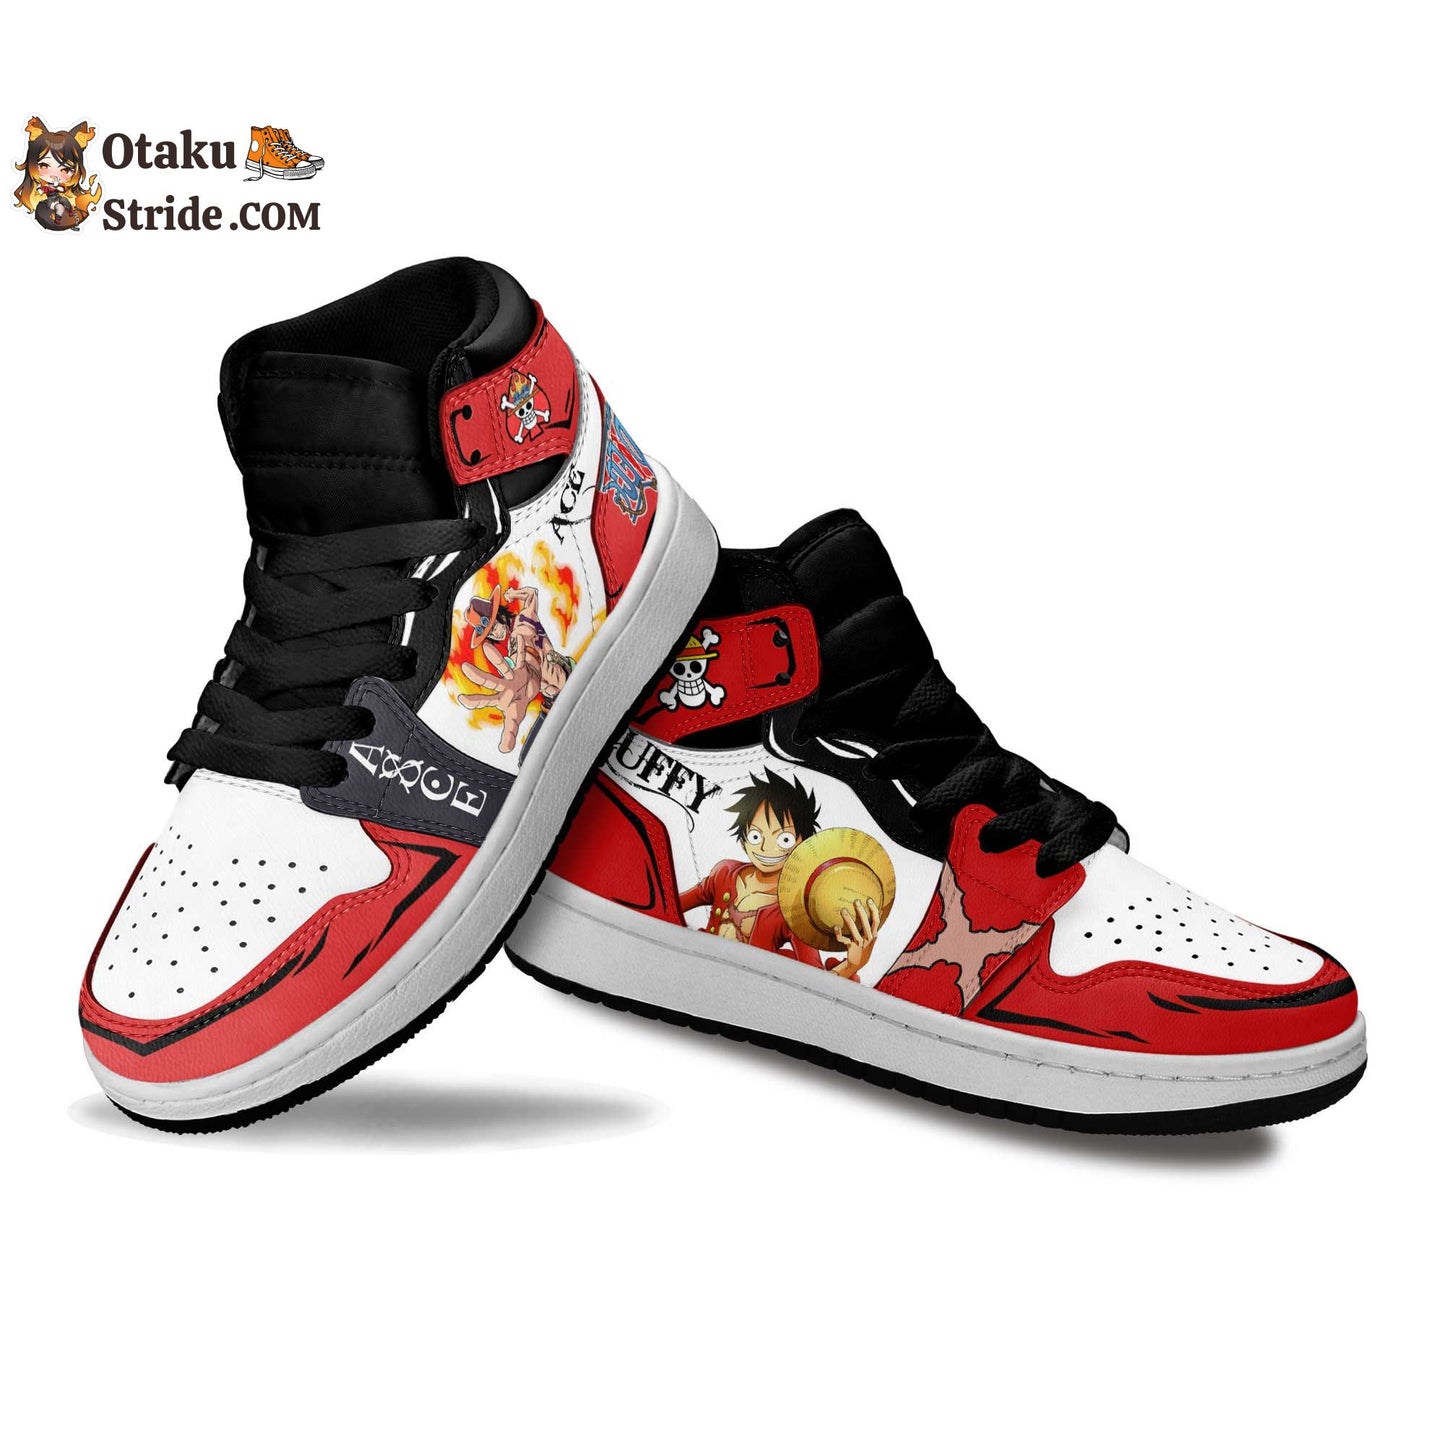 Custom Anime One Piece Kids Sneakers Featuring Ace and Luffy